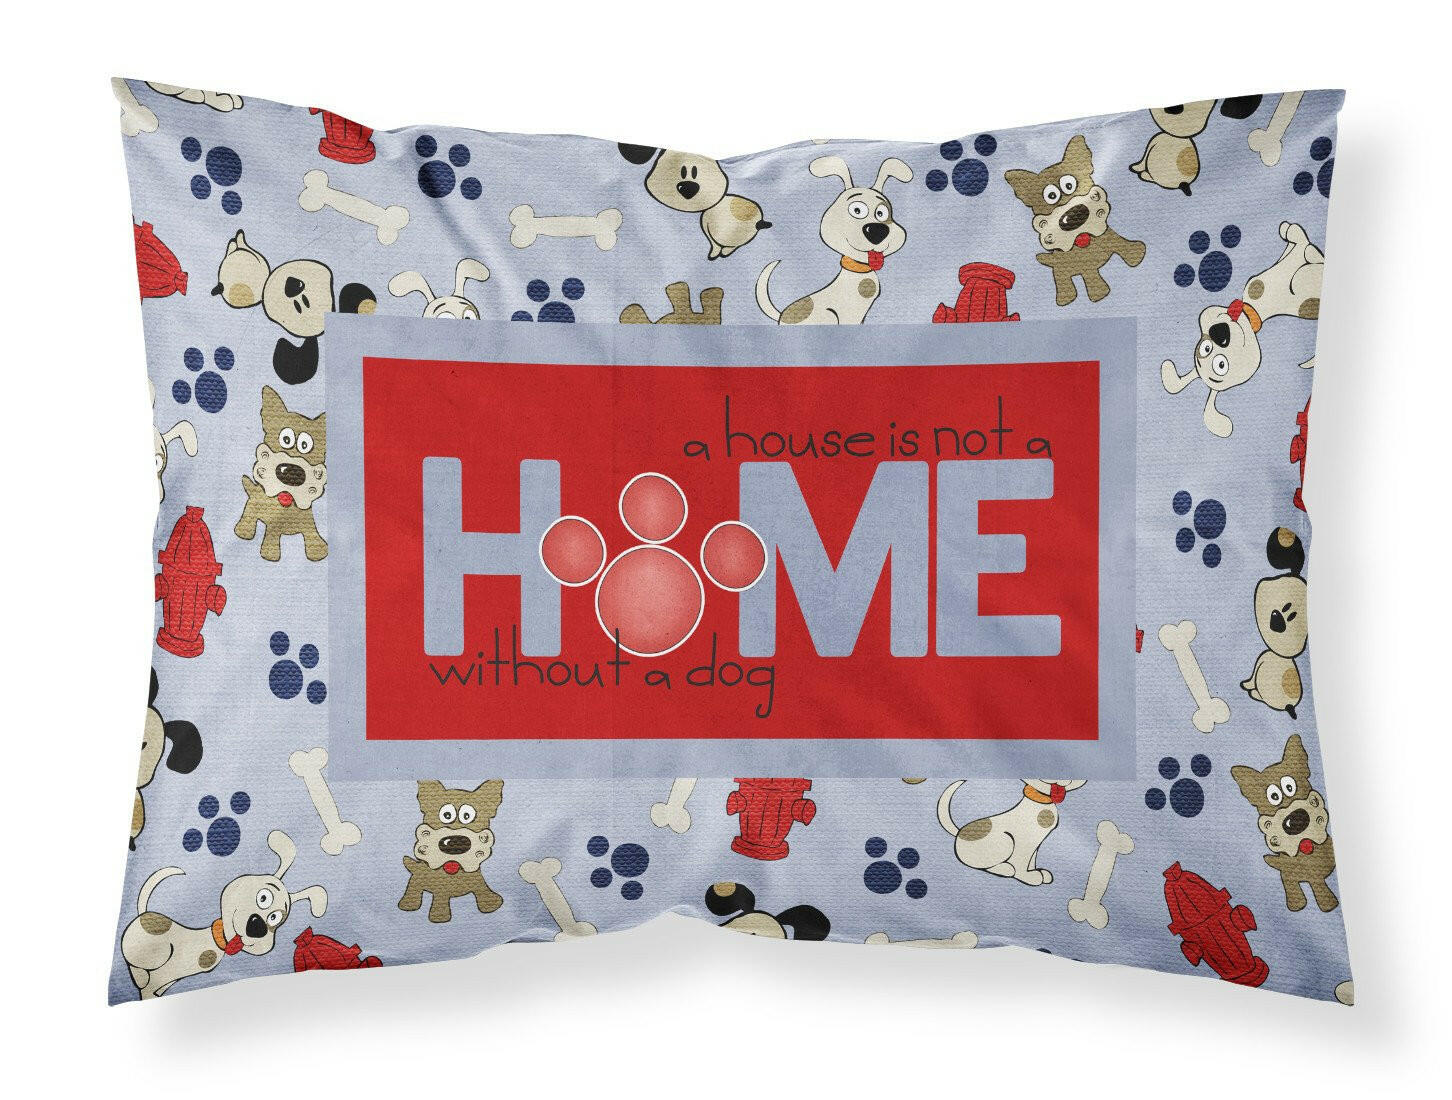 A House is not a home without a dog Moisture wicking Fabric standard pillowcase SB3052PILLOWCASE by Caroline's Treasures